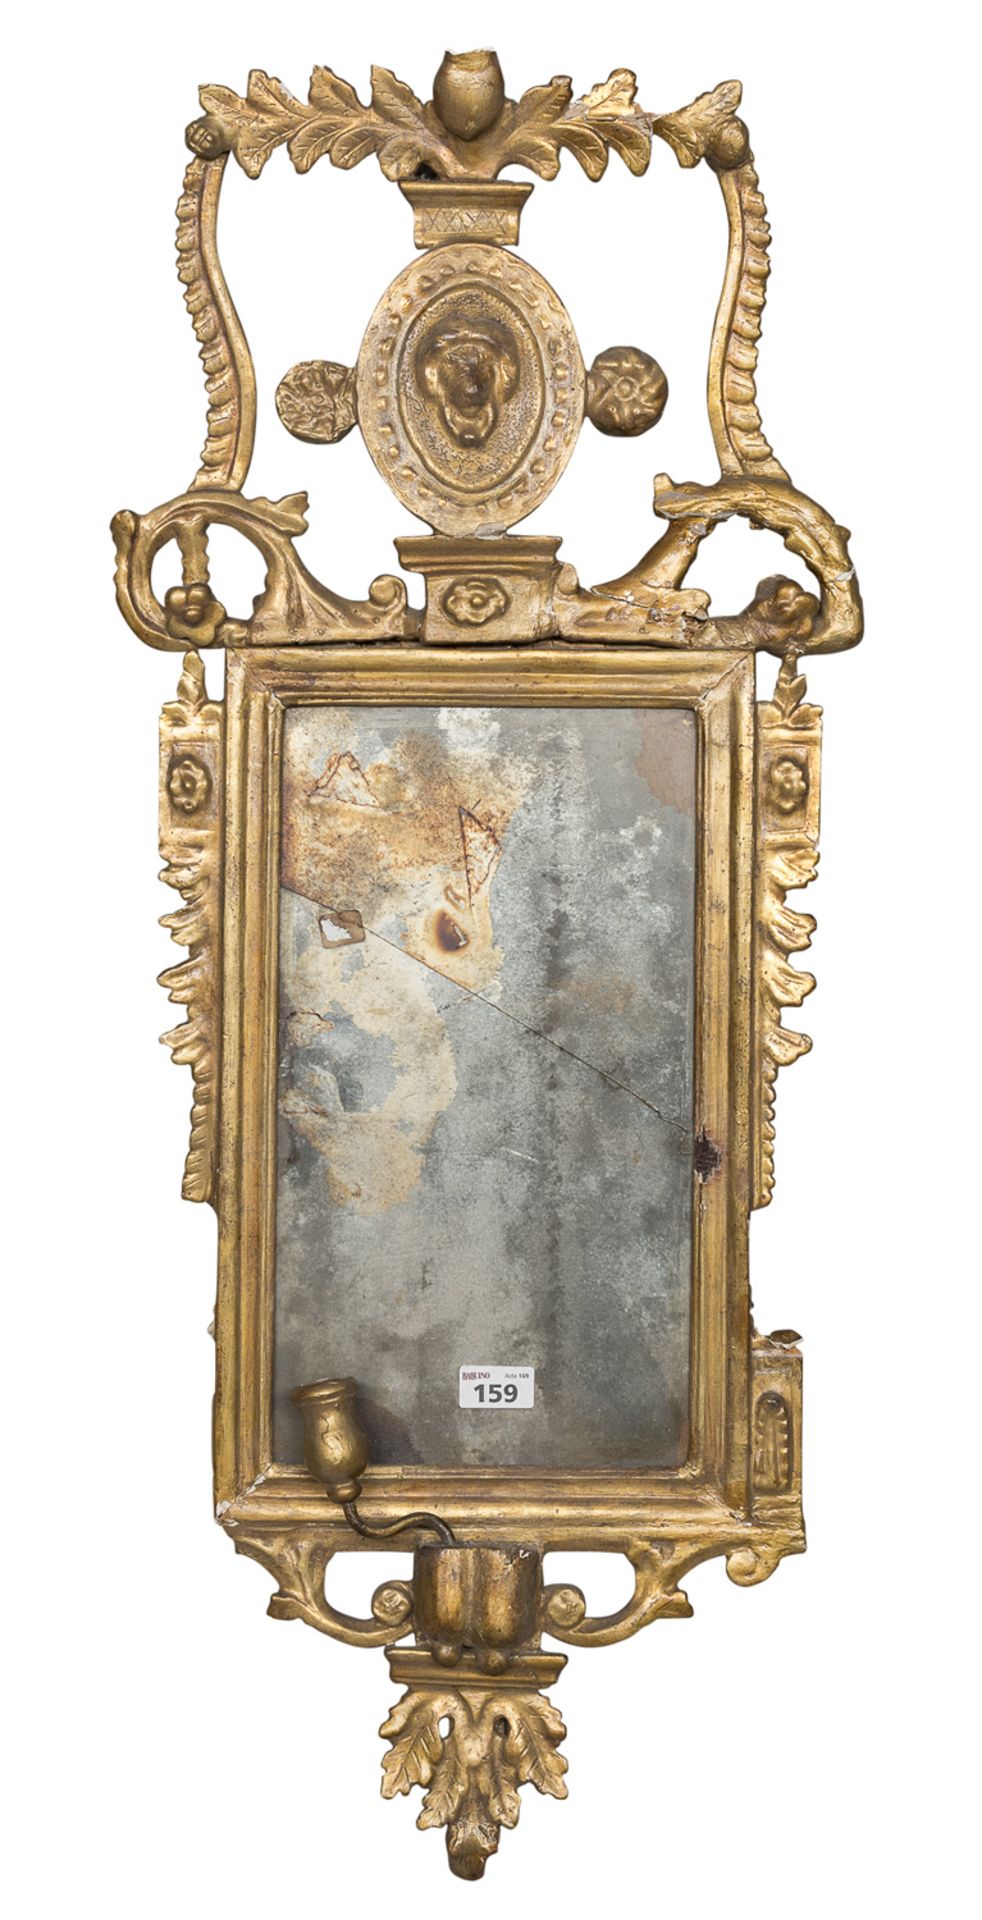 REMAINS OF MIRROR IN GILTWOOD 18TH CENTURY